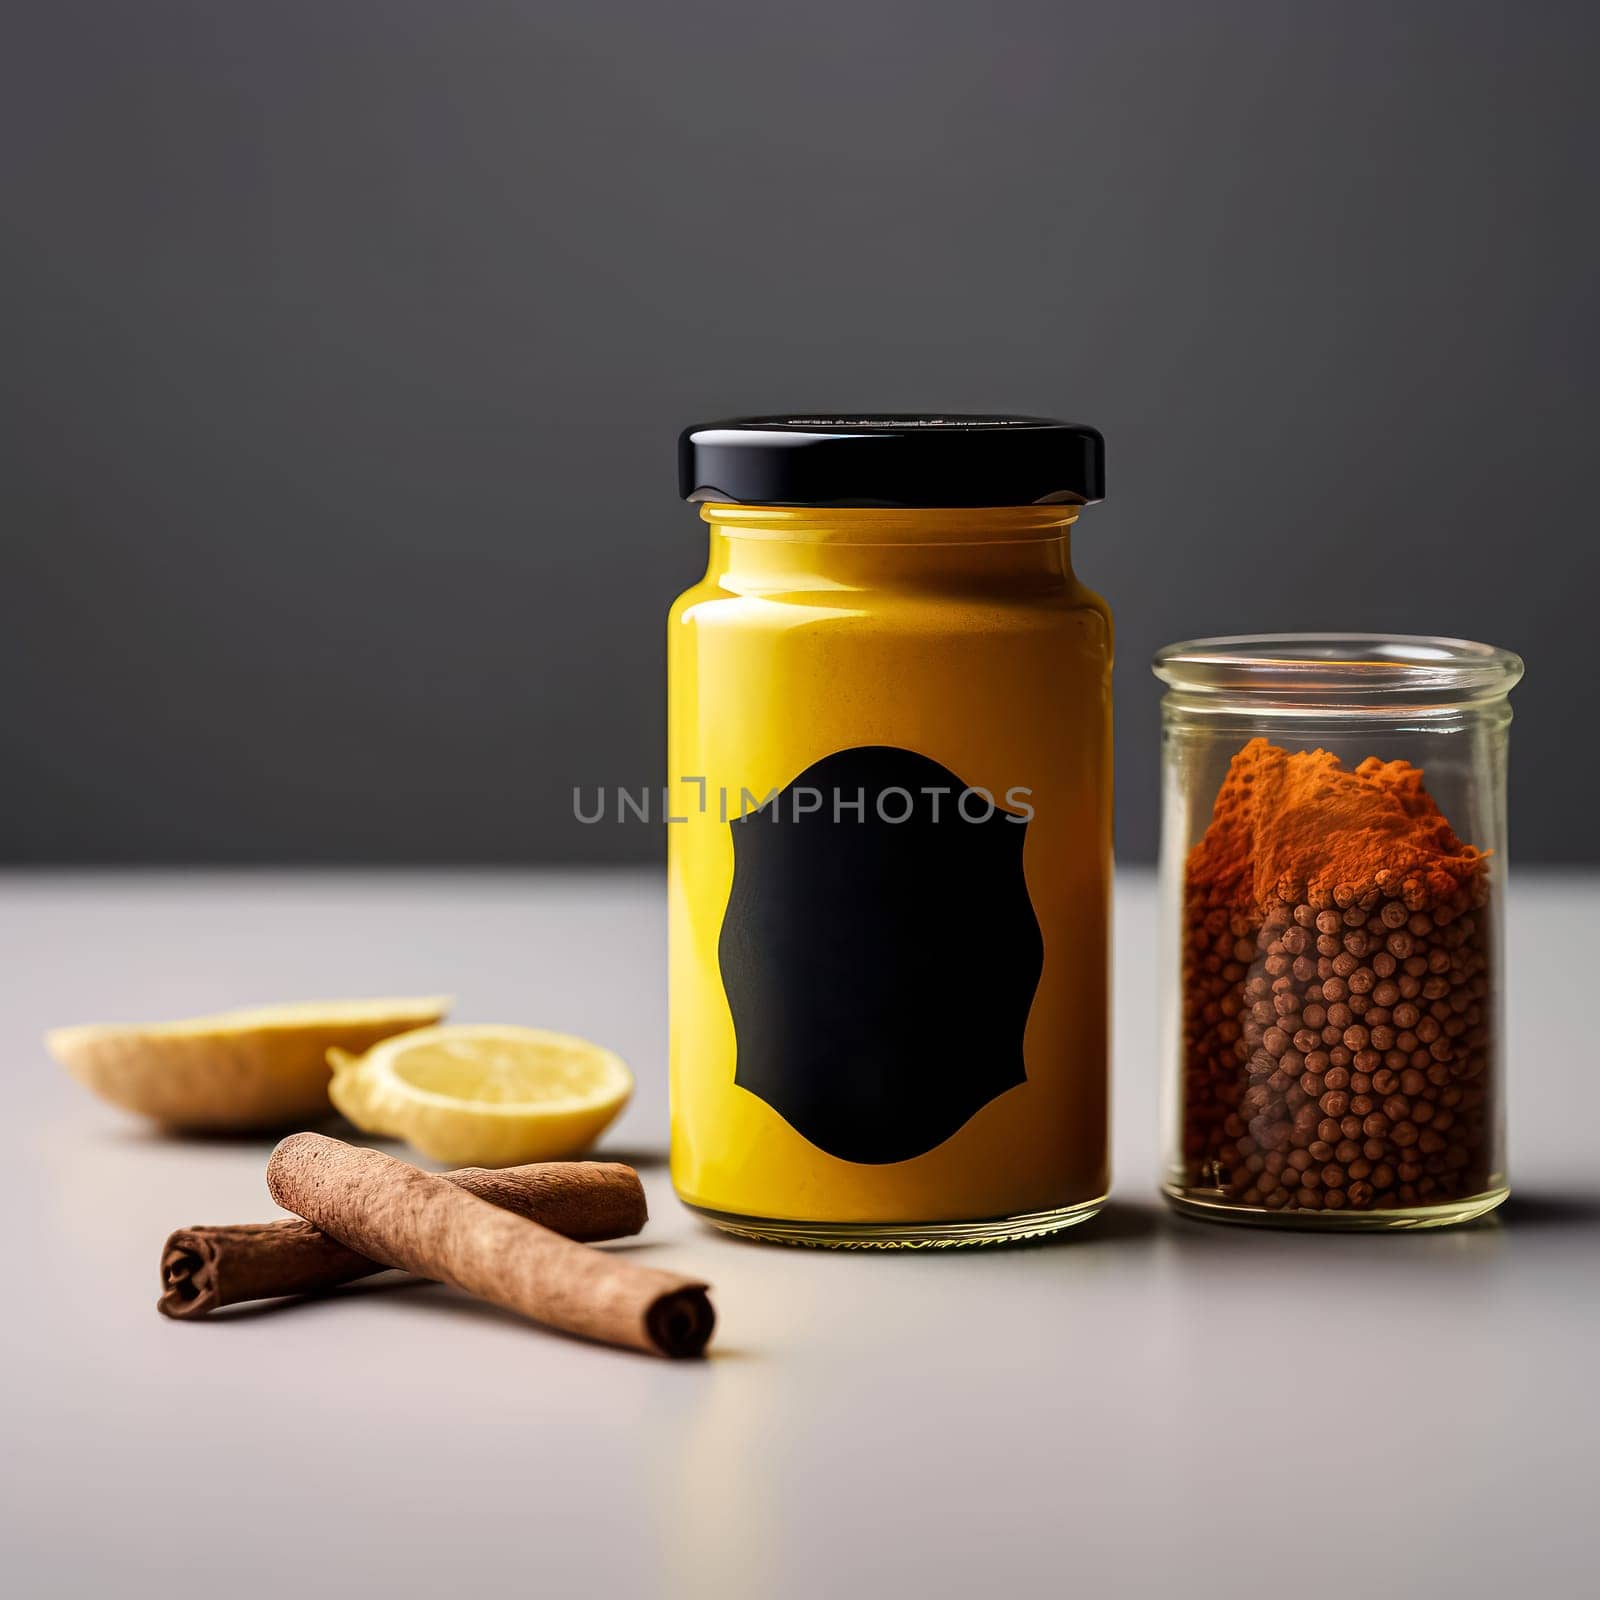 A jar of yellow mustard sits on a table next to a jar of spices. The mustard jar is black and has a label on it. The scene is simple